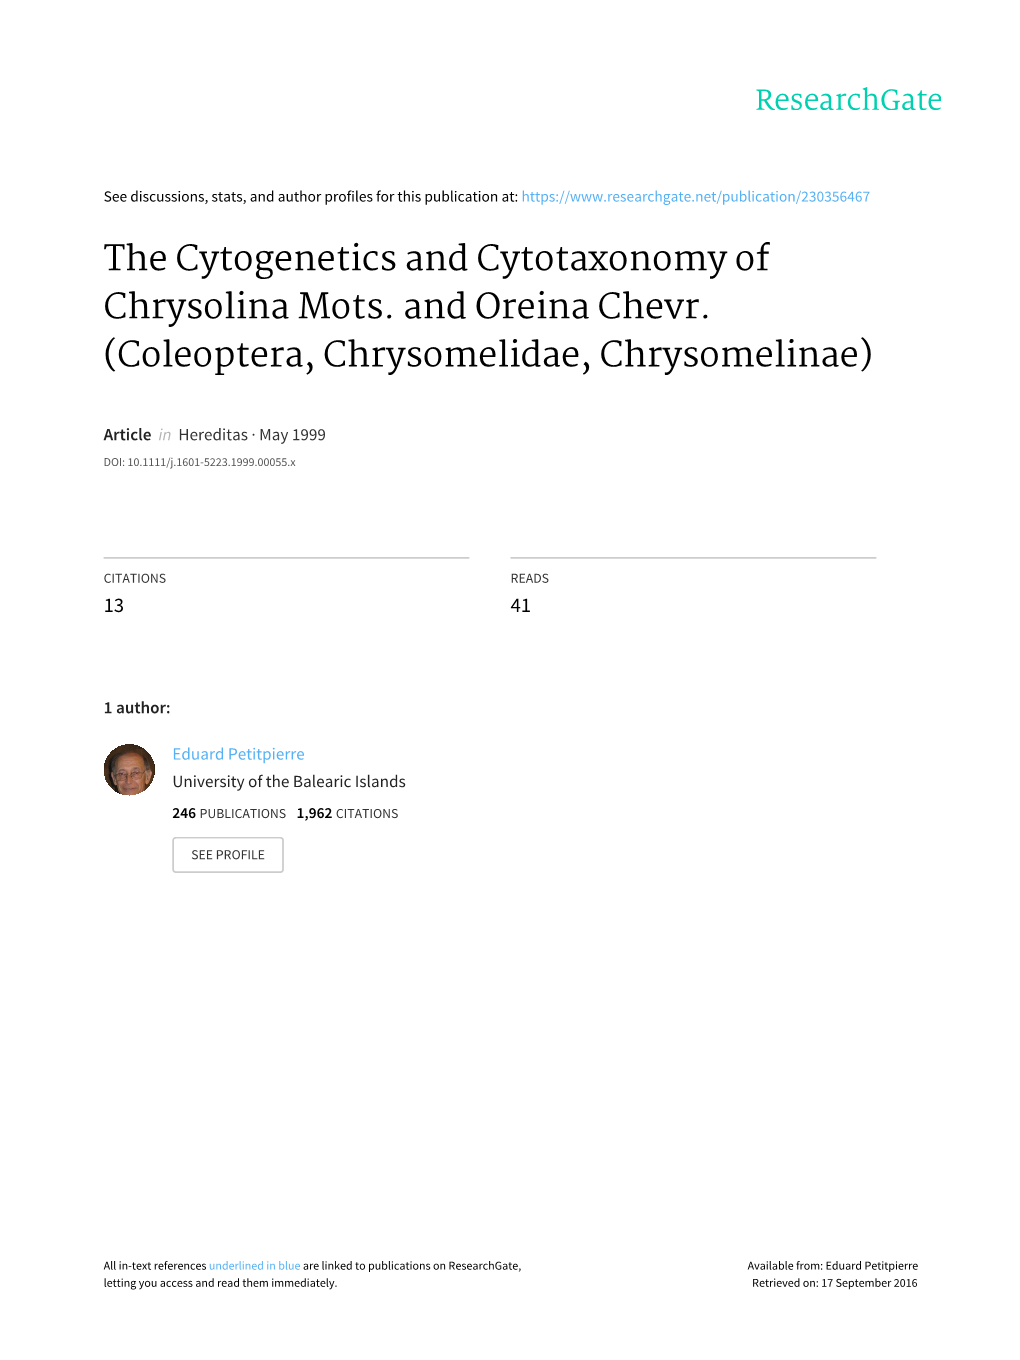 The Cytogenetics and Cytotaxonomy of Chrysolina Mots. and Oreina Chevr